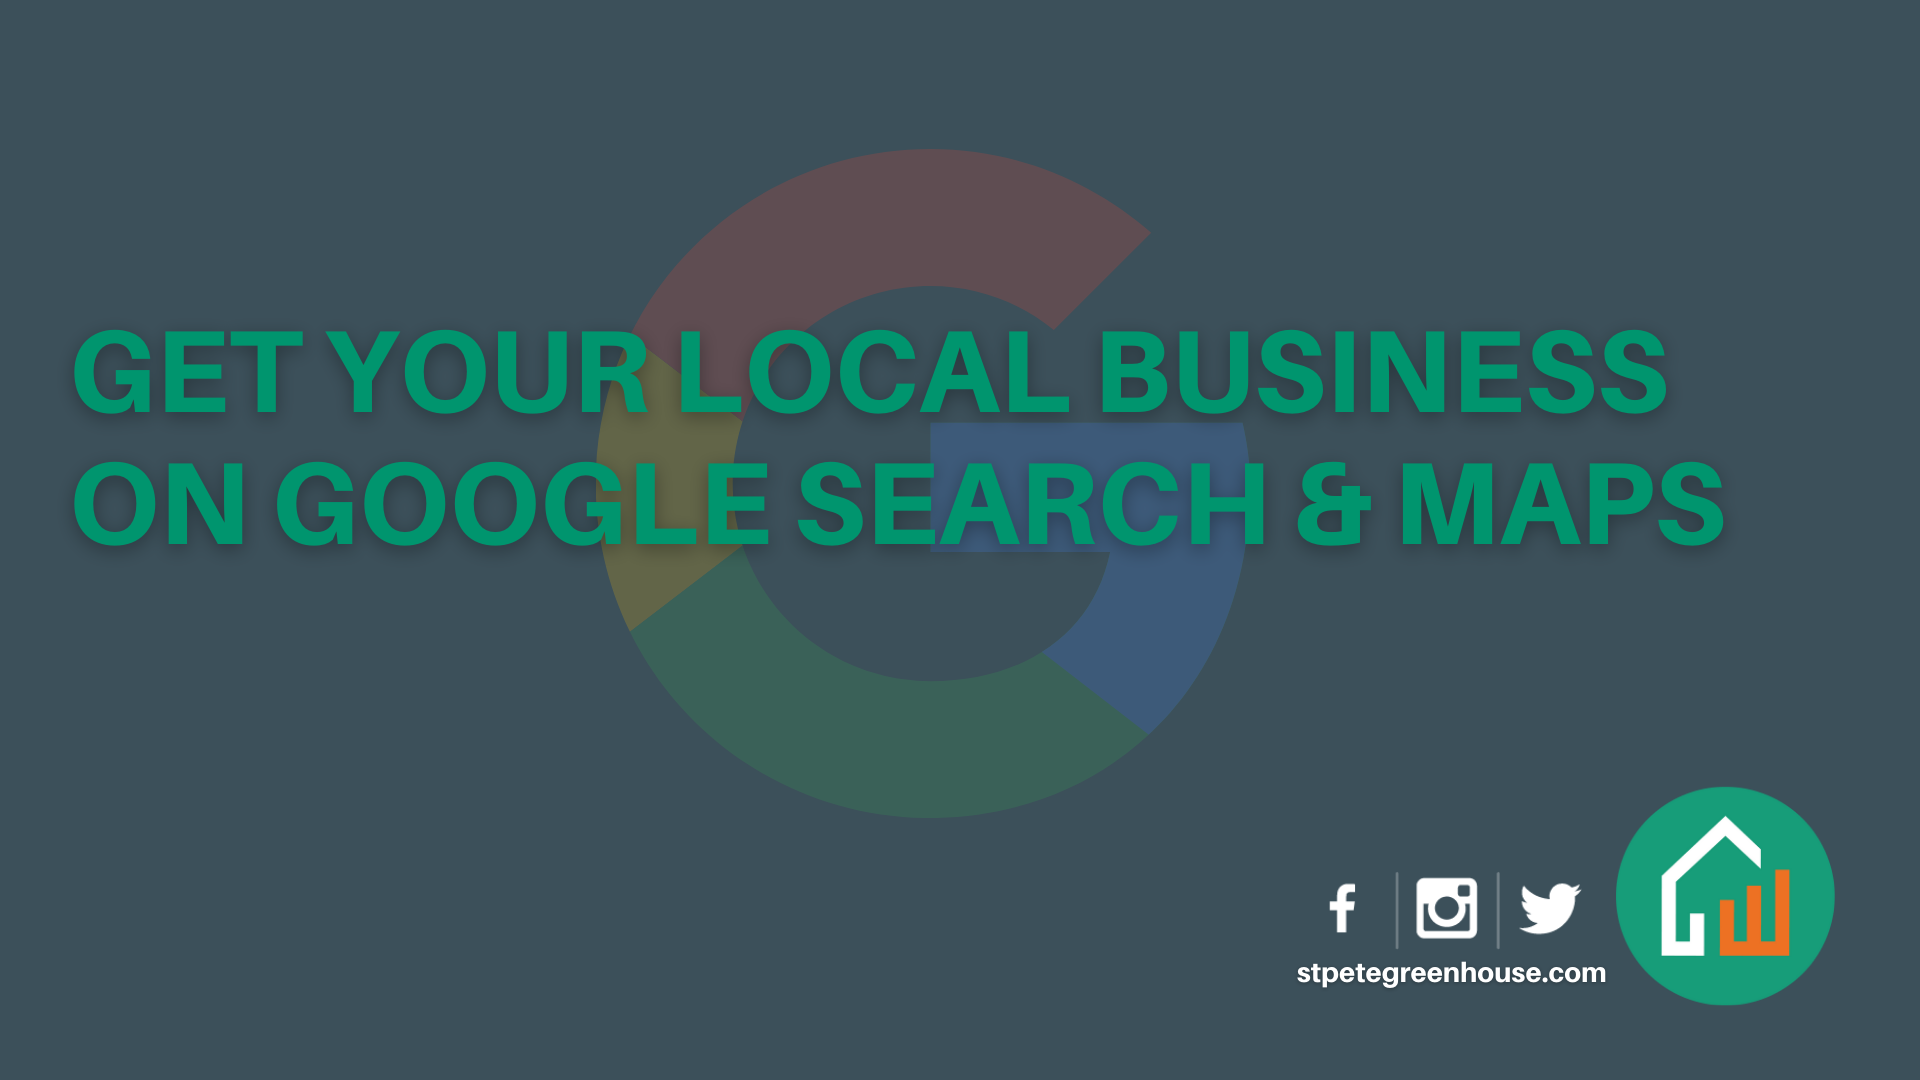 Get Your Local Business on Google Search & Maps main image